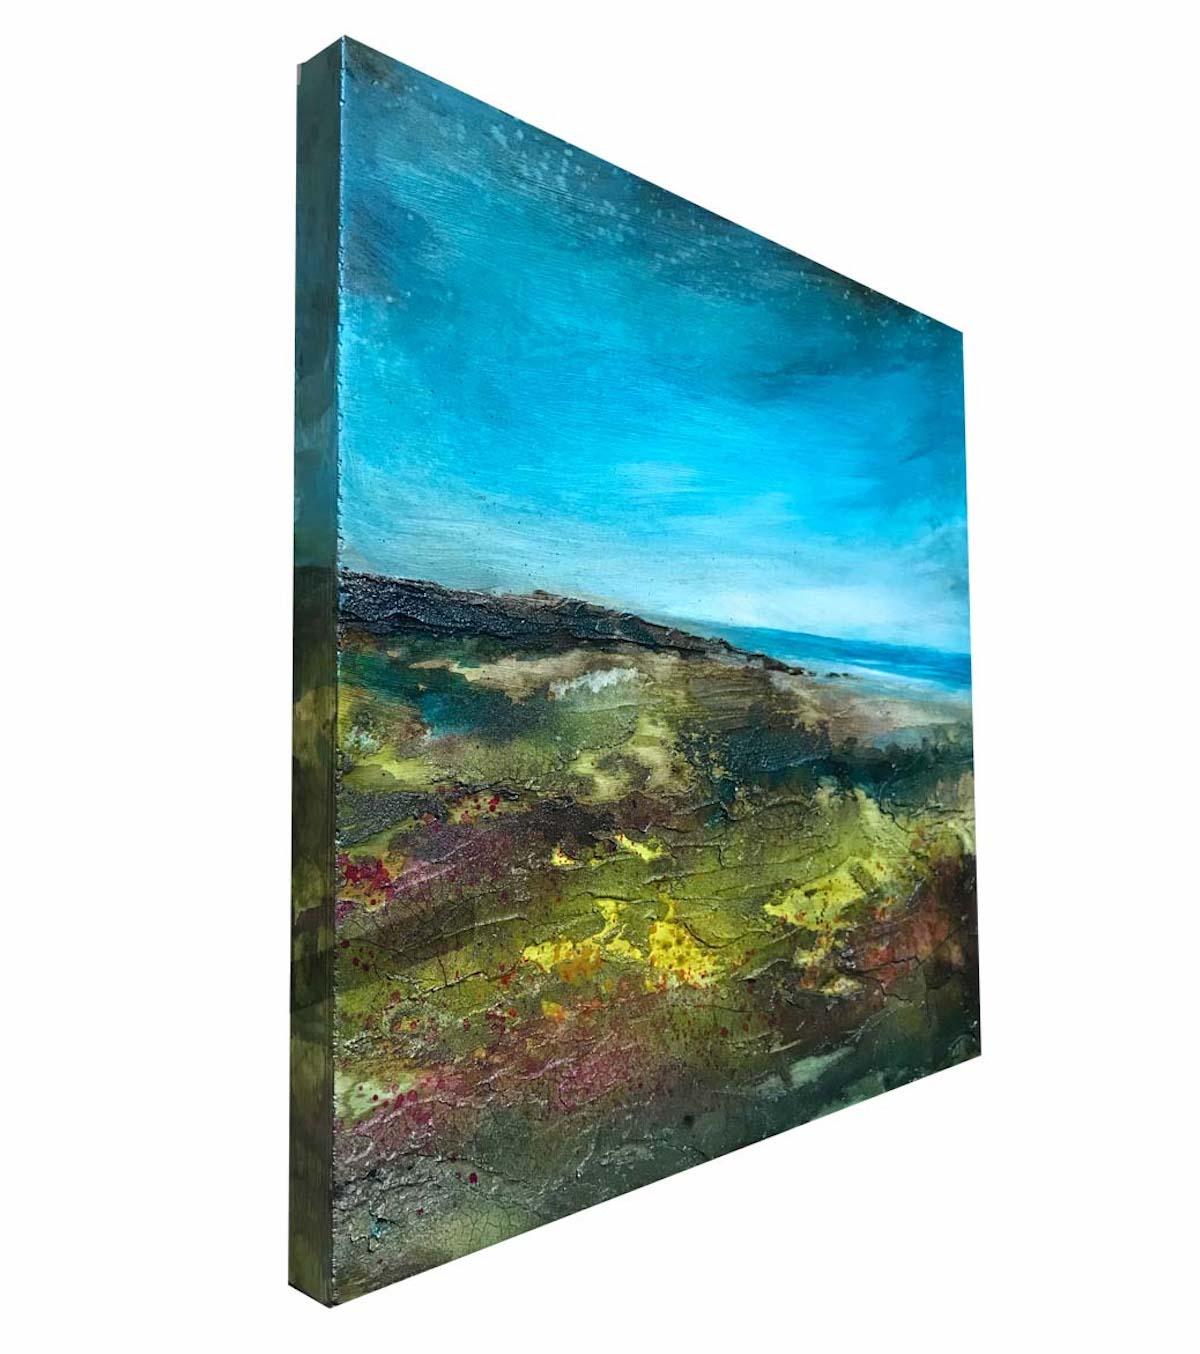 Coastal Viewpoint by Cathryn Jeff [2021]
original and hand signed by the artist 
Mixed Media on Wooden Panel
Image size: H:30 cm x W:30 cm
Complete Size of Unframed Work: H:30 cm x W:30 cm x D:2.2cm
Sold Unframed
Please note that insitu images are